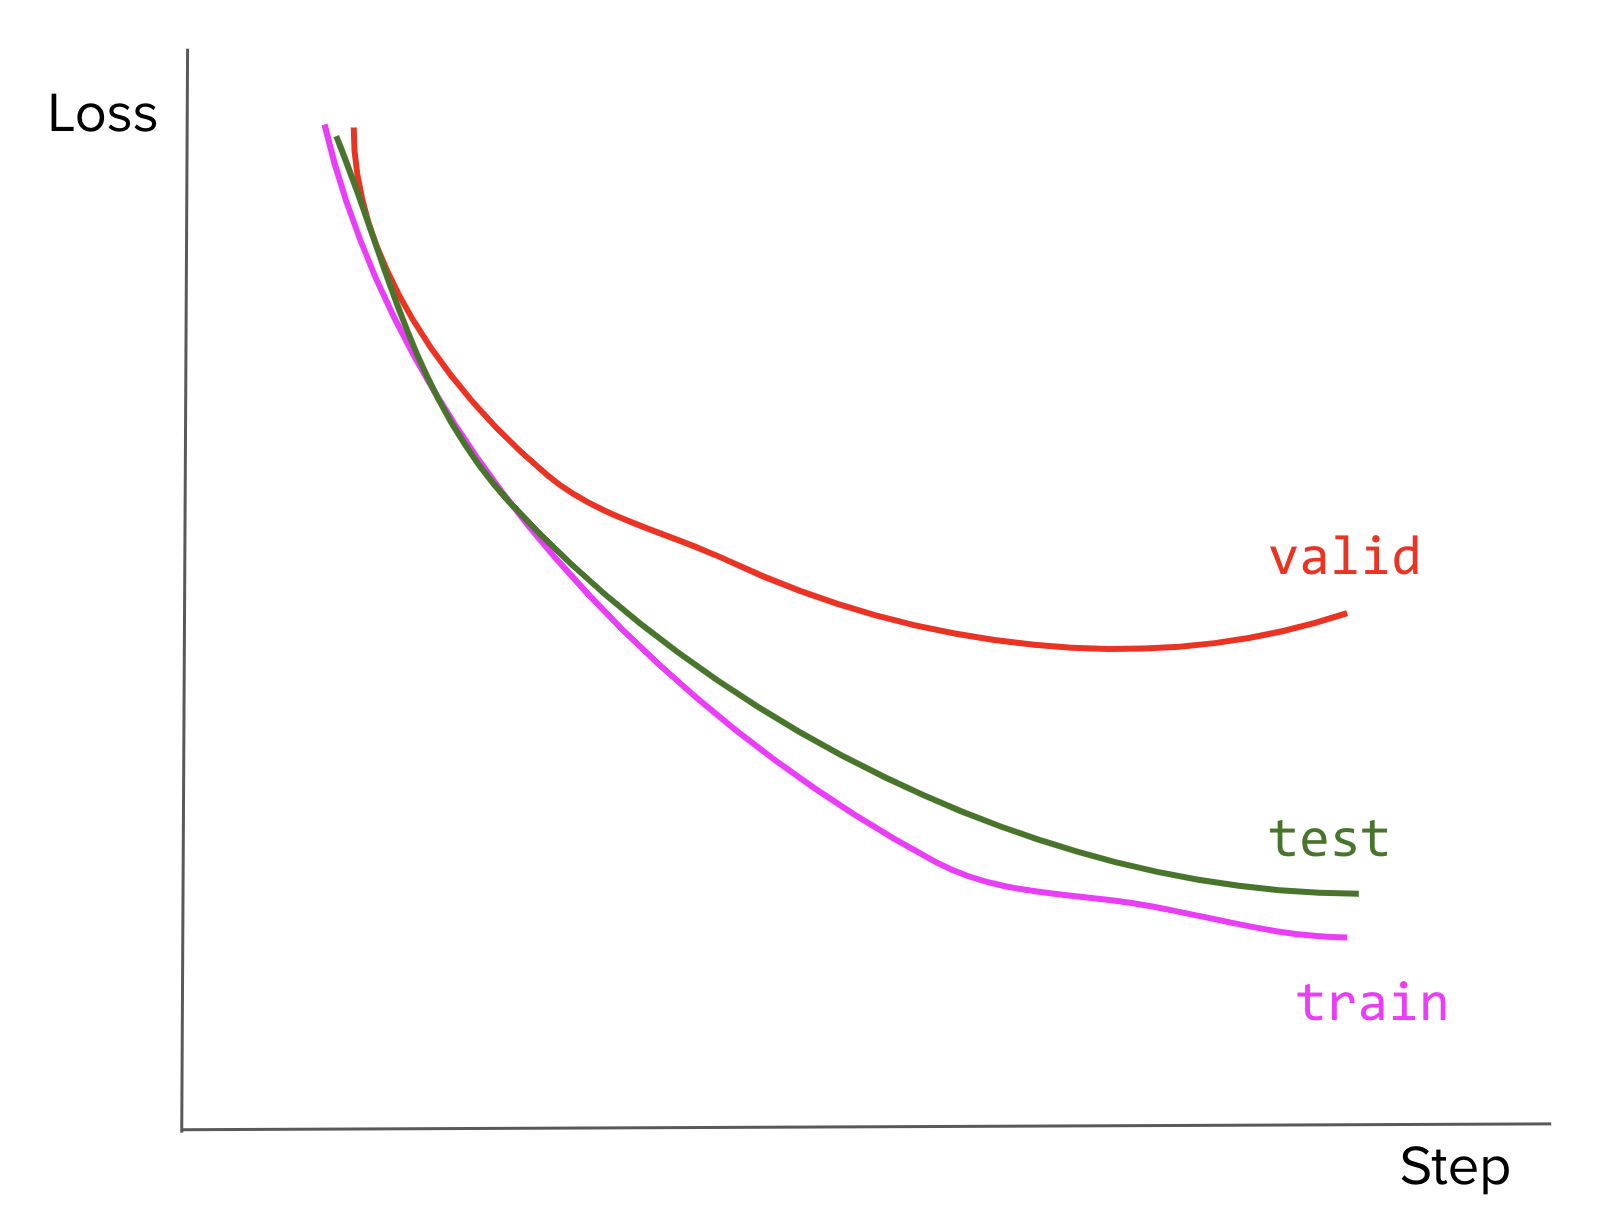 Problematic loss curves